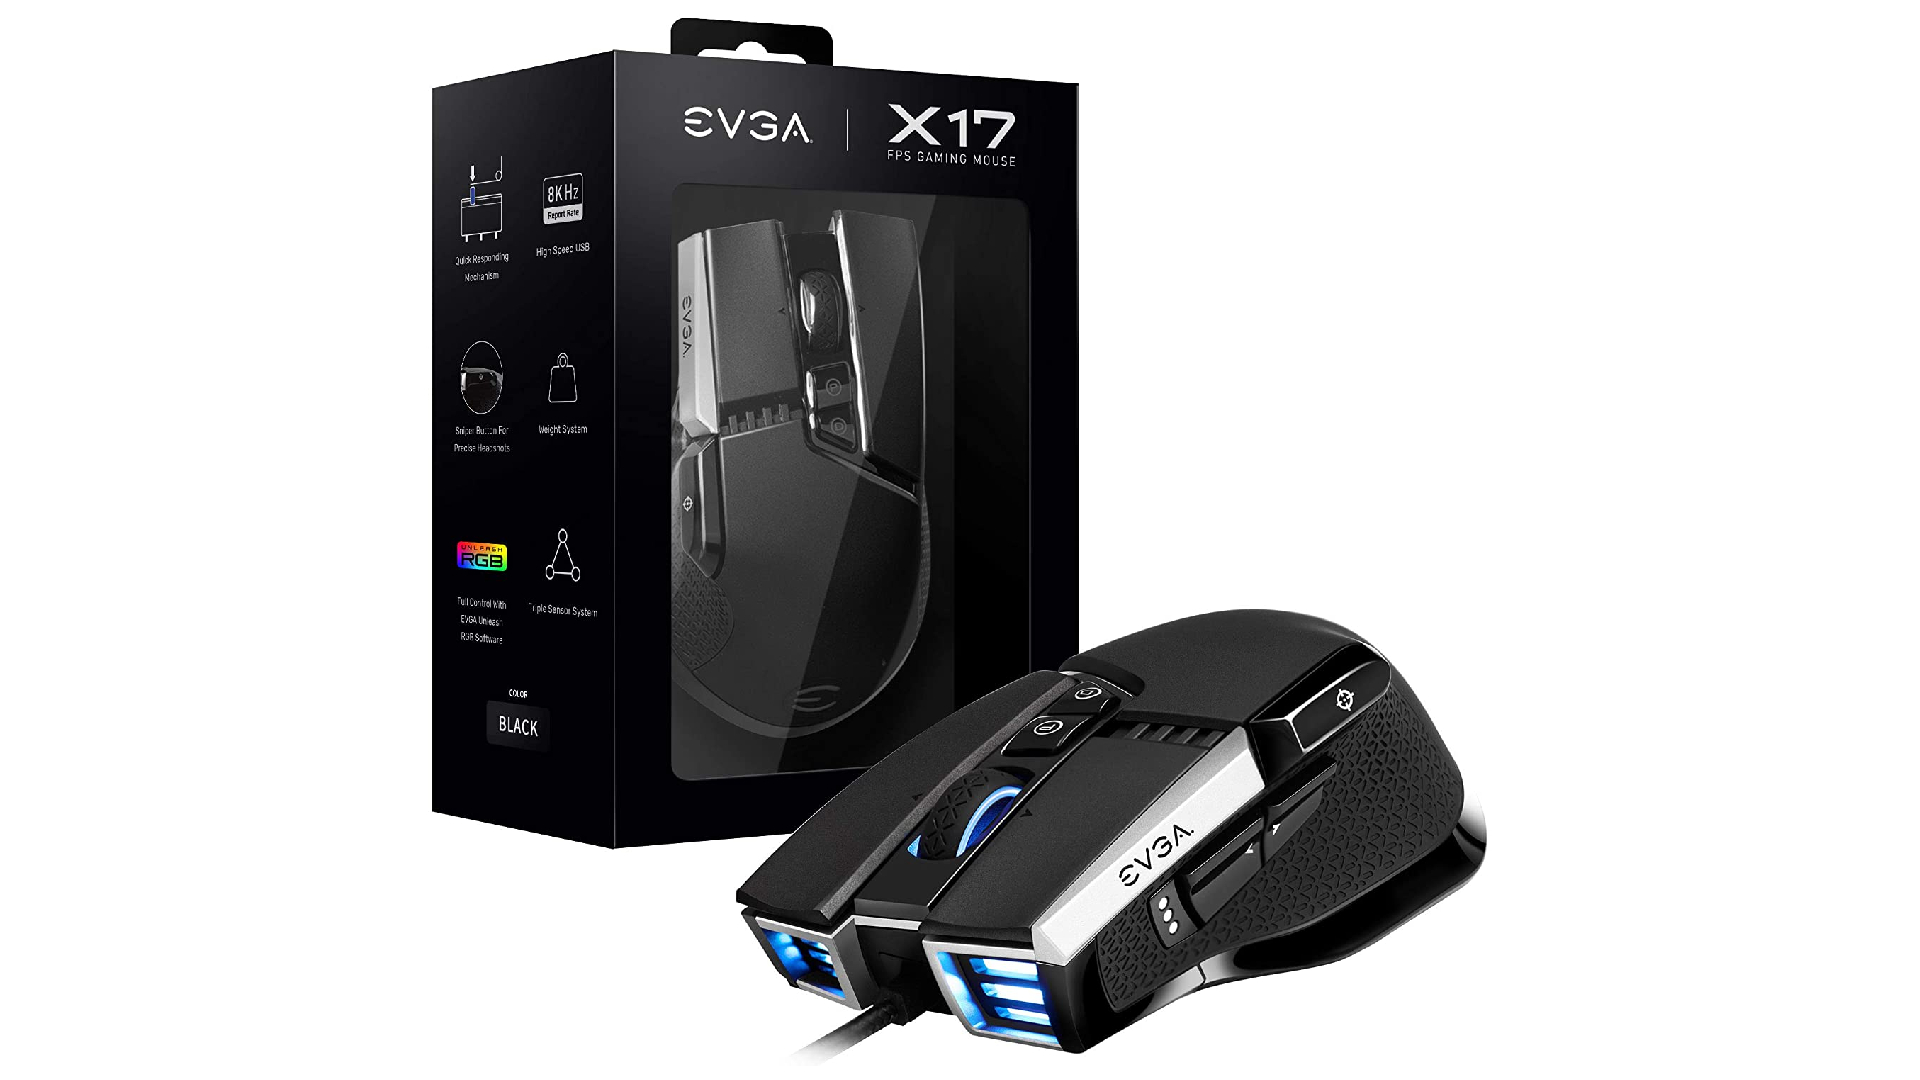 EVGA X17 gaming mouse and box on white backdrop